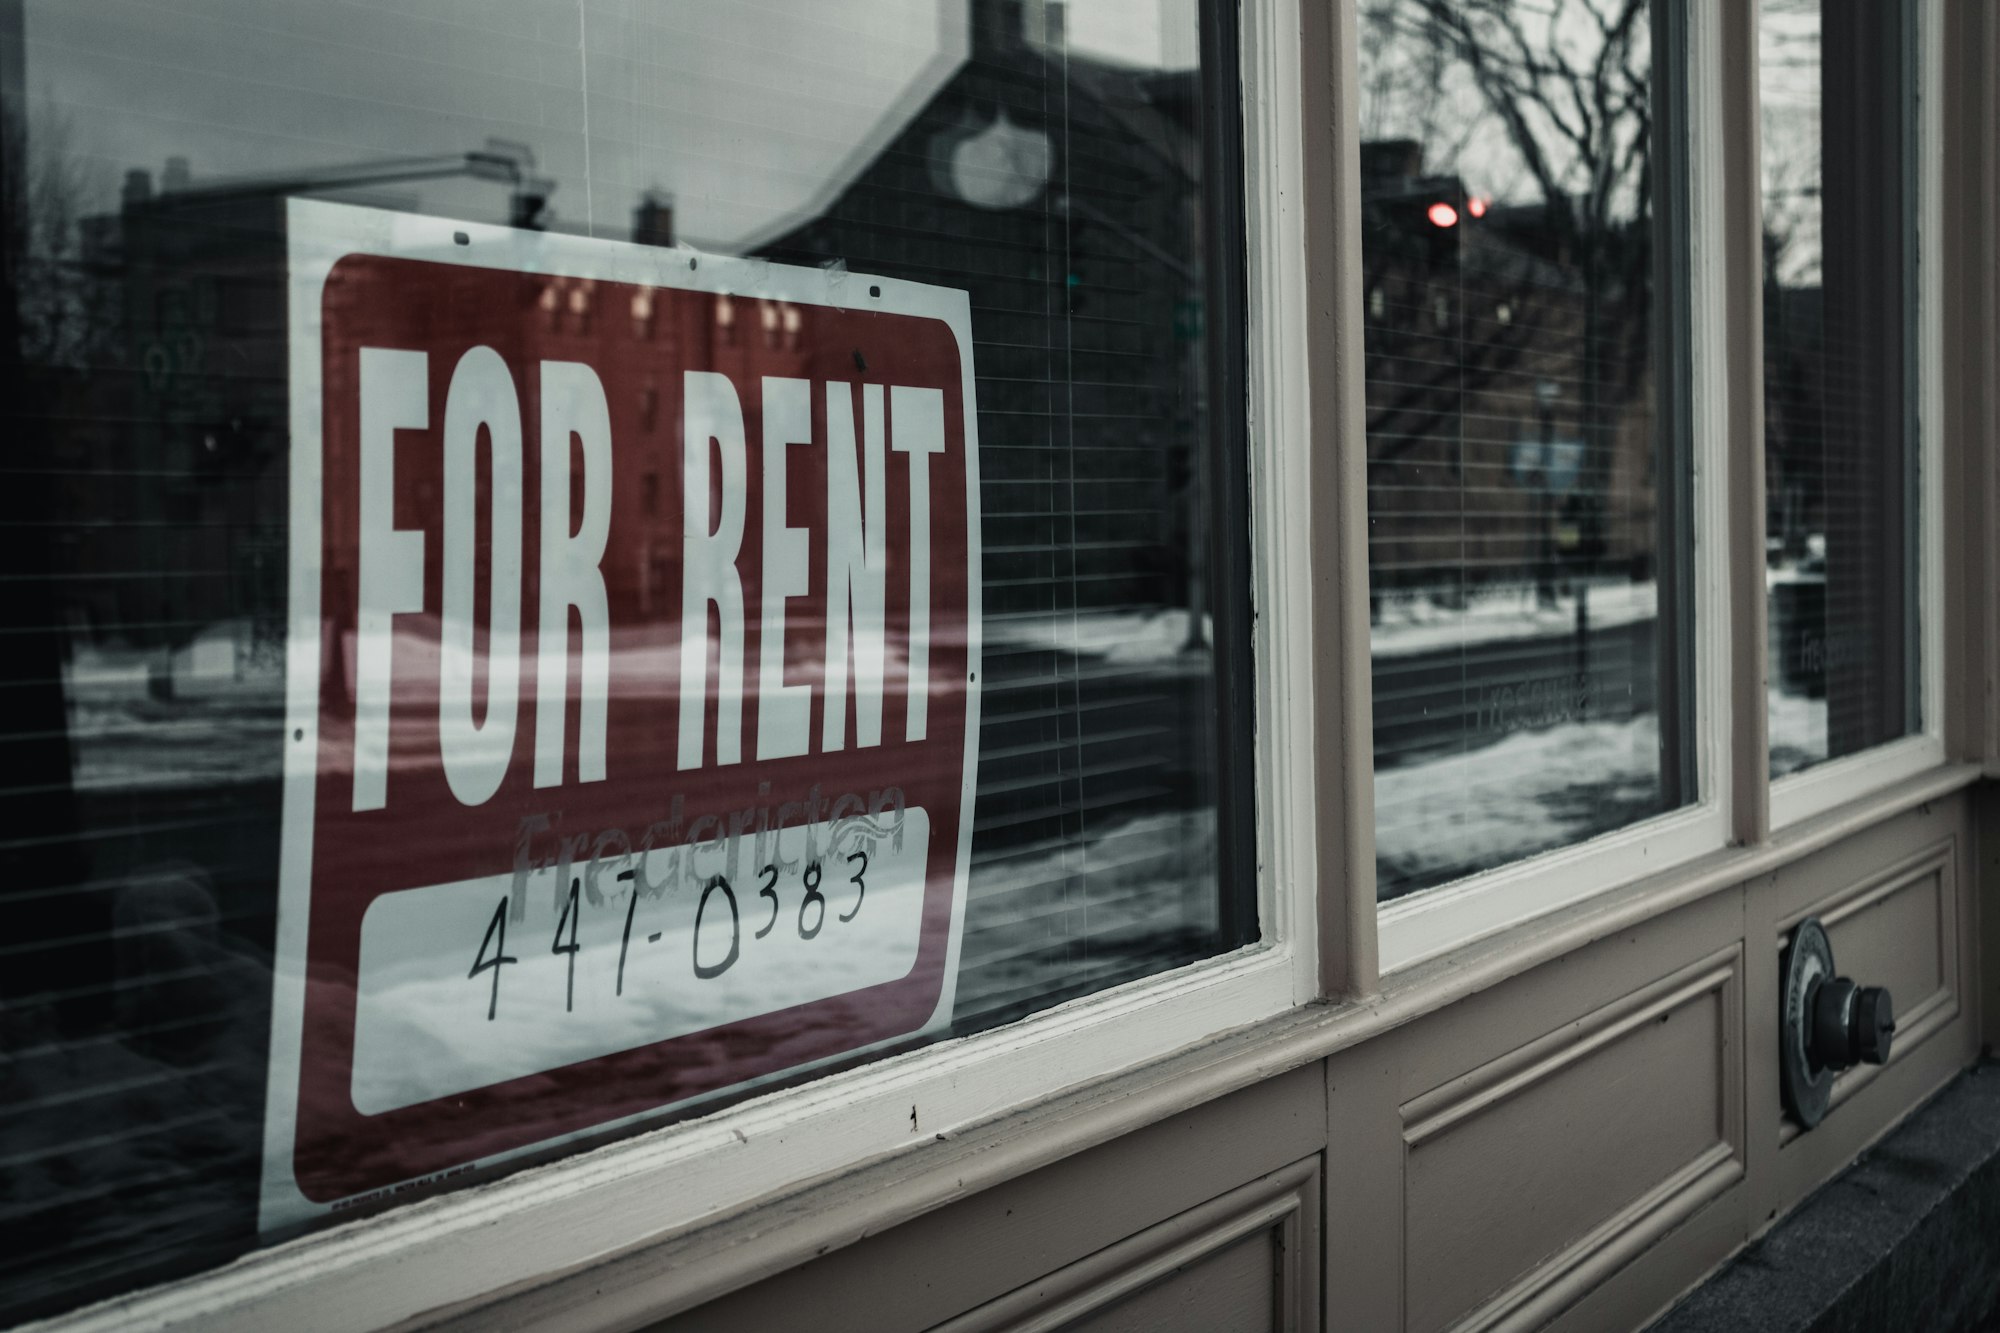 Rent Prices On The Decline